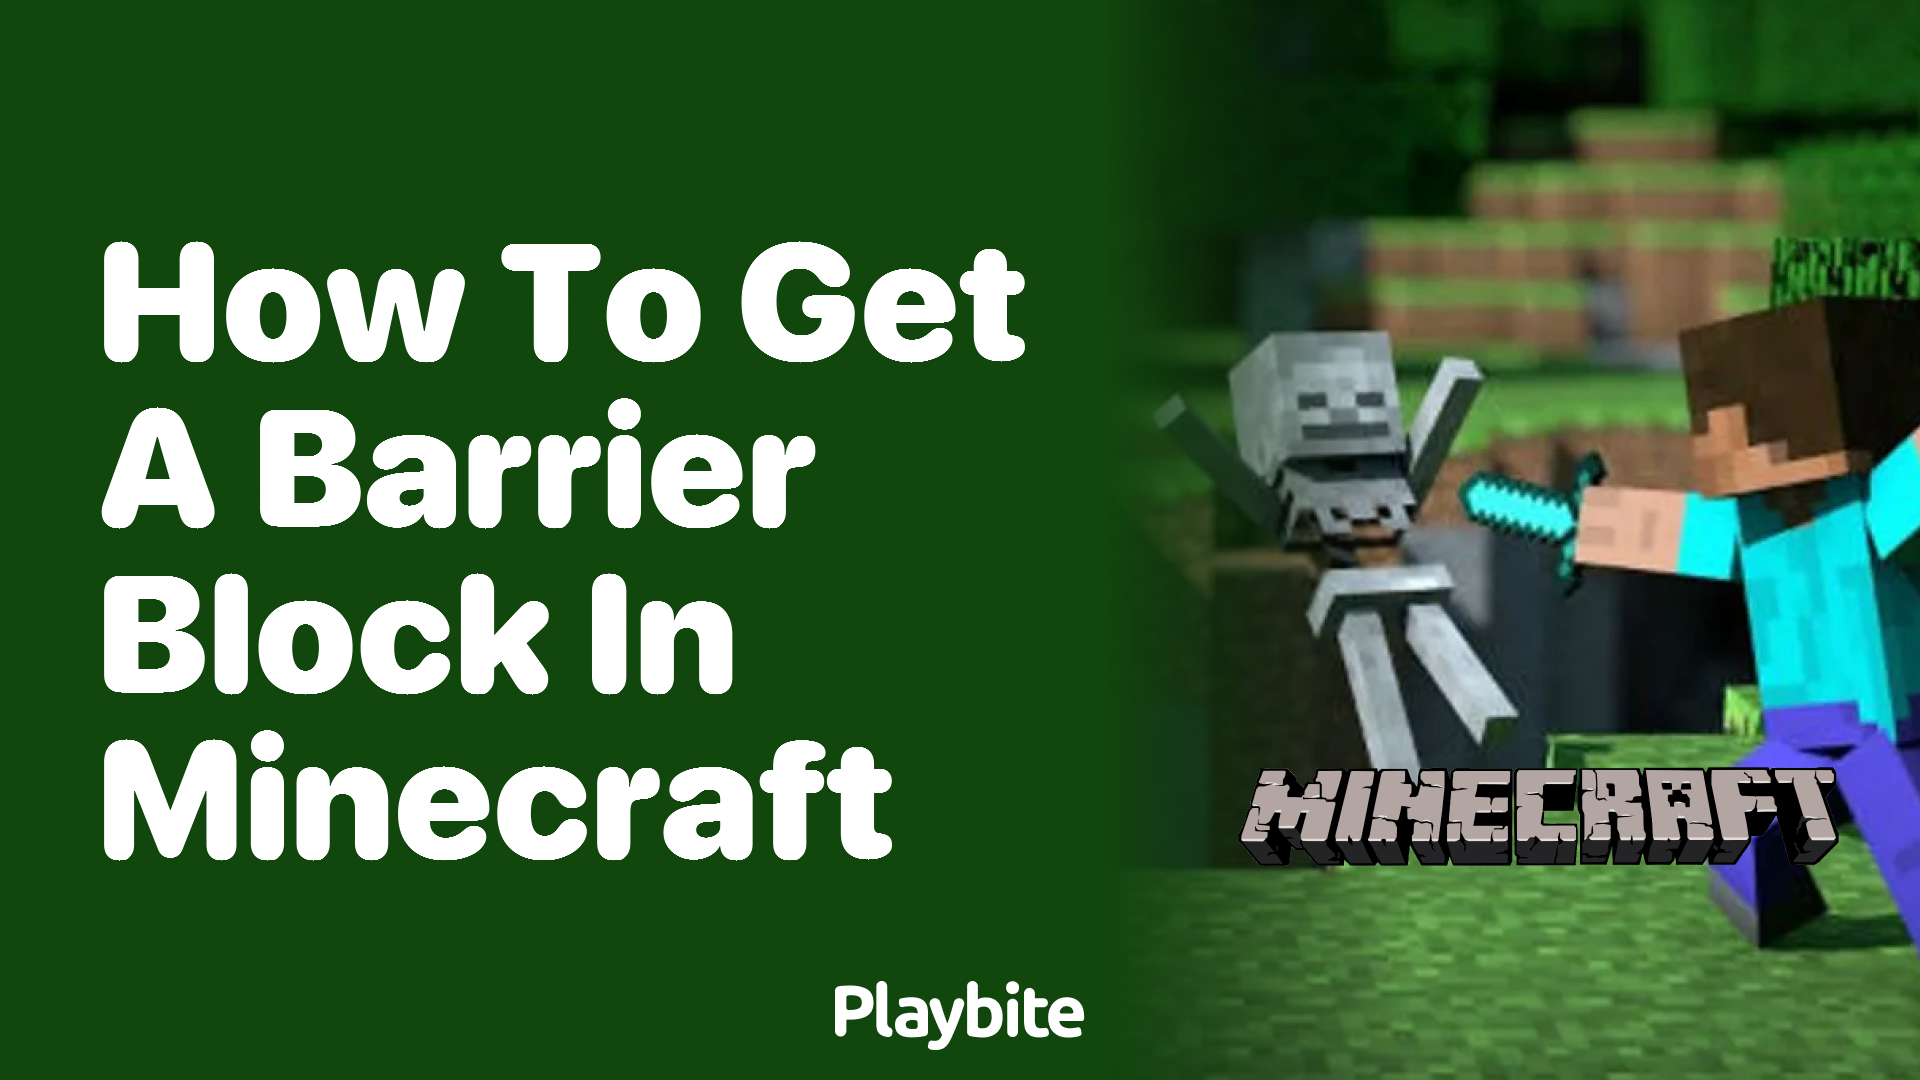 How to Get a Barrier Block in Minecraft